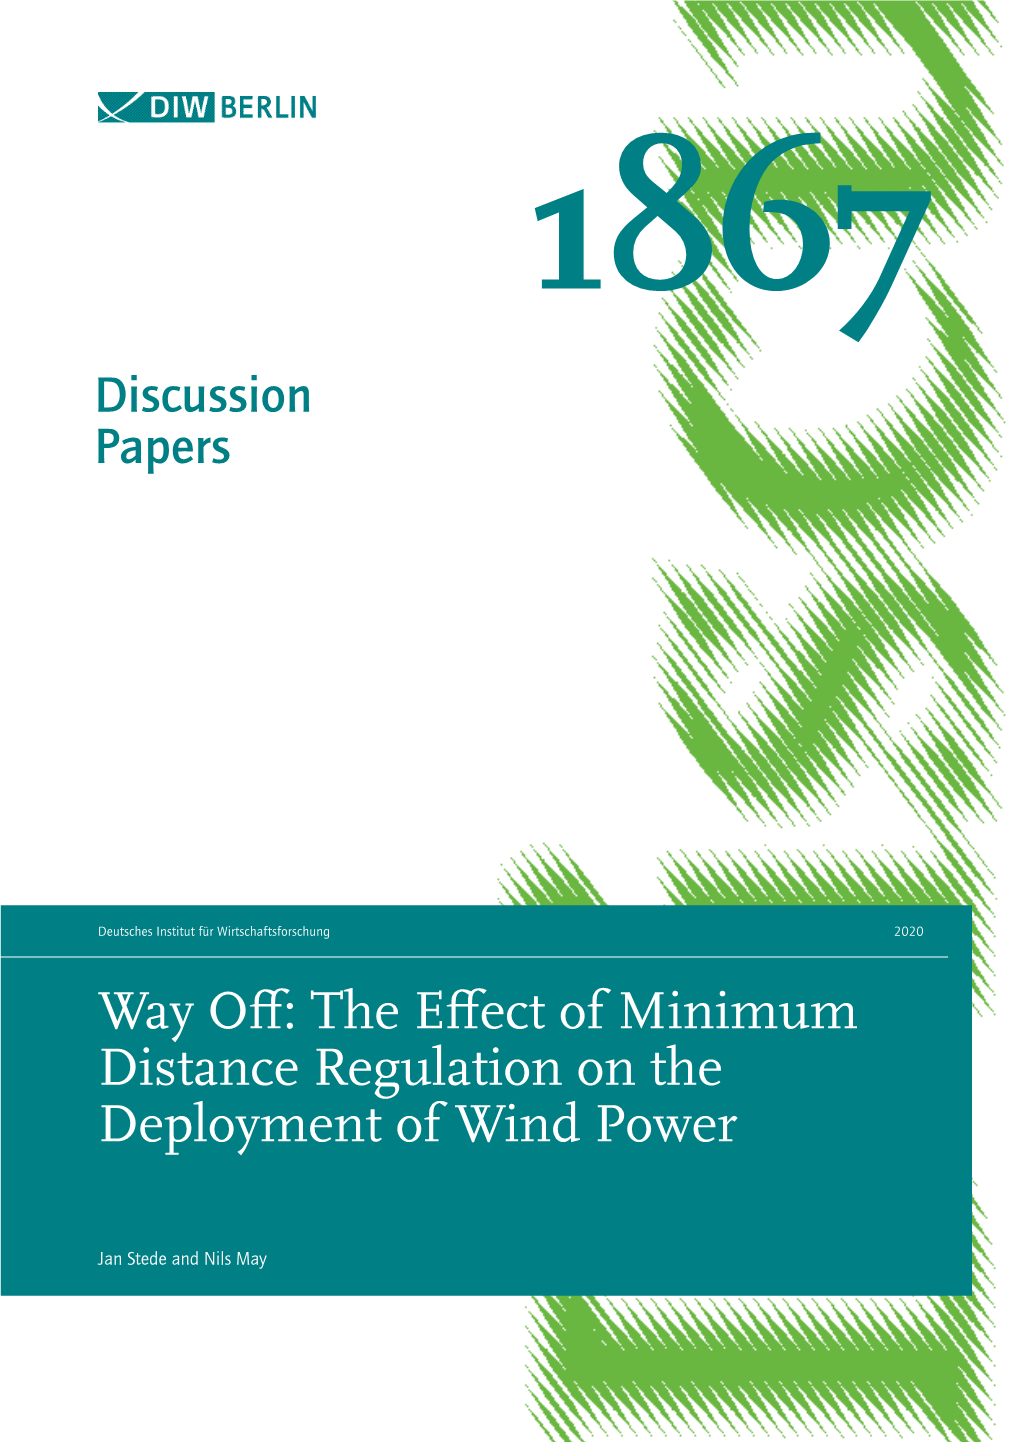 Way Off: the Effect of Minimum Distance Regulation on the Deployment of Wind Power